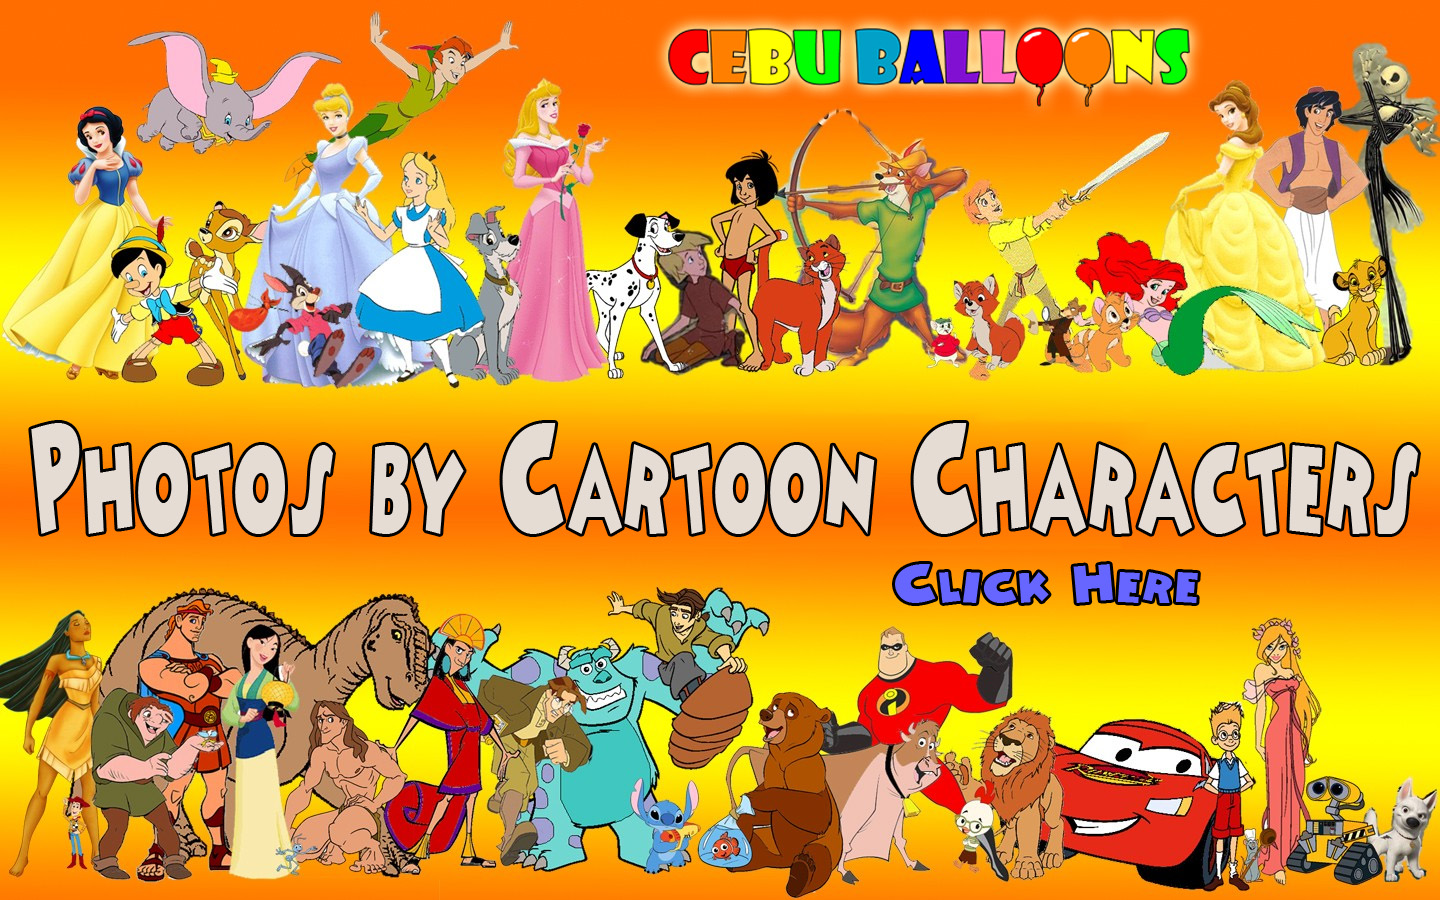 Photos by Cartoon Characters | Cebu Balloons and Party Supplies